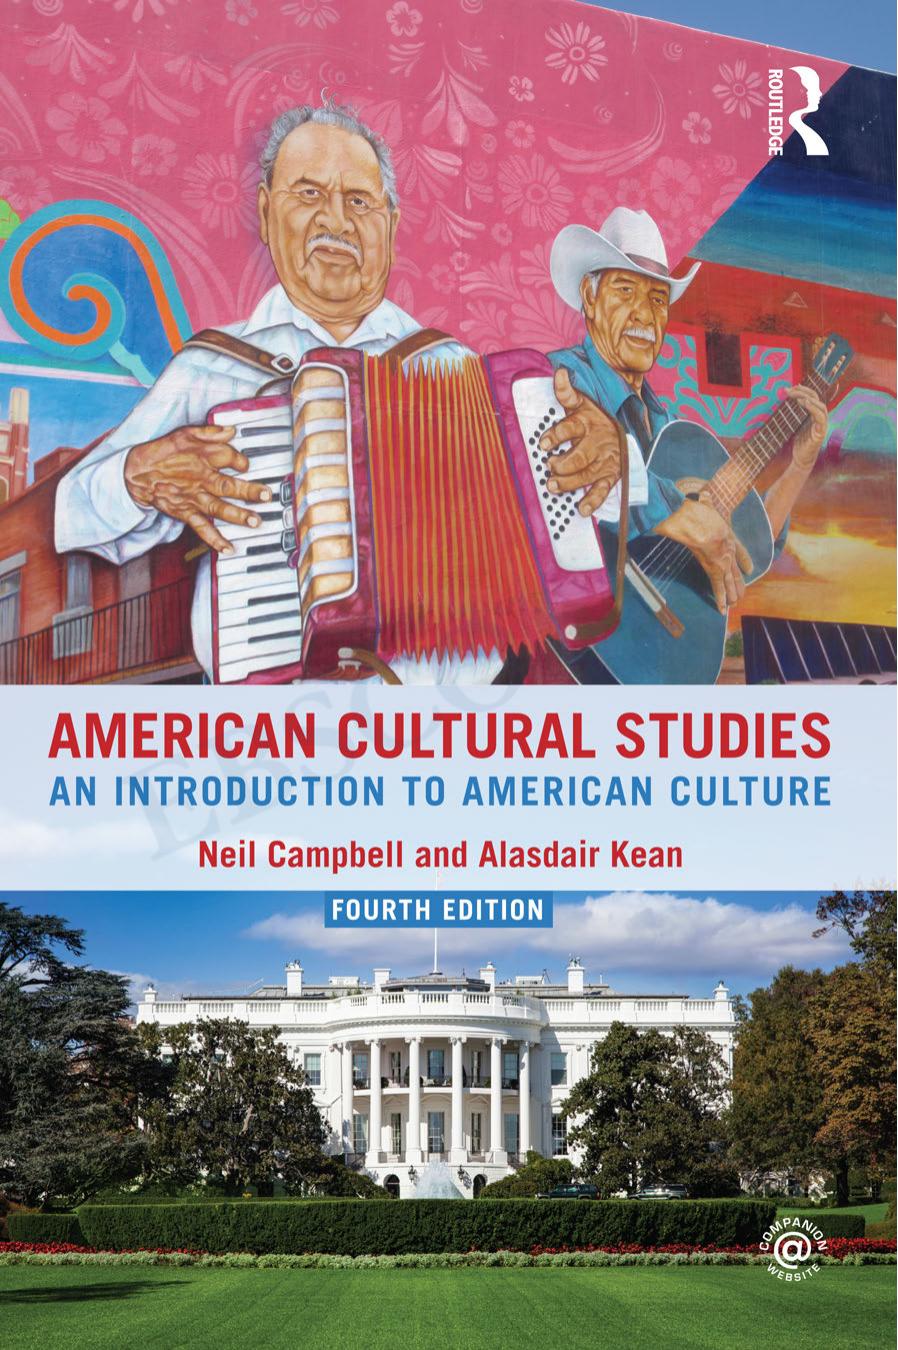 American Cultural Studies An Introduction to American Culture 2016